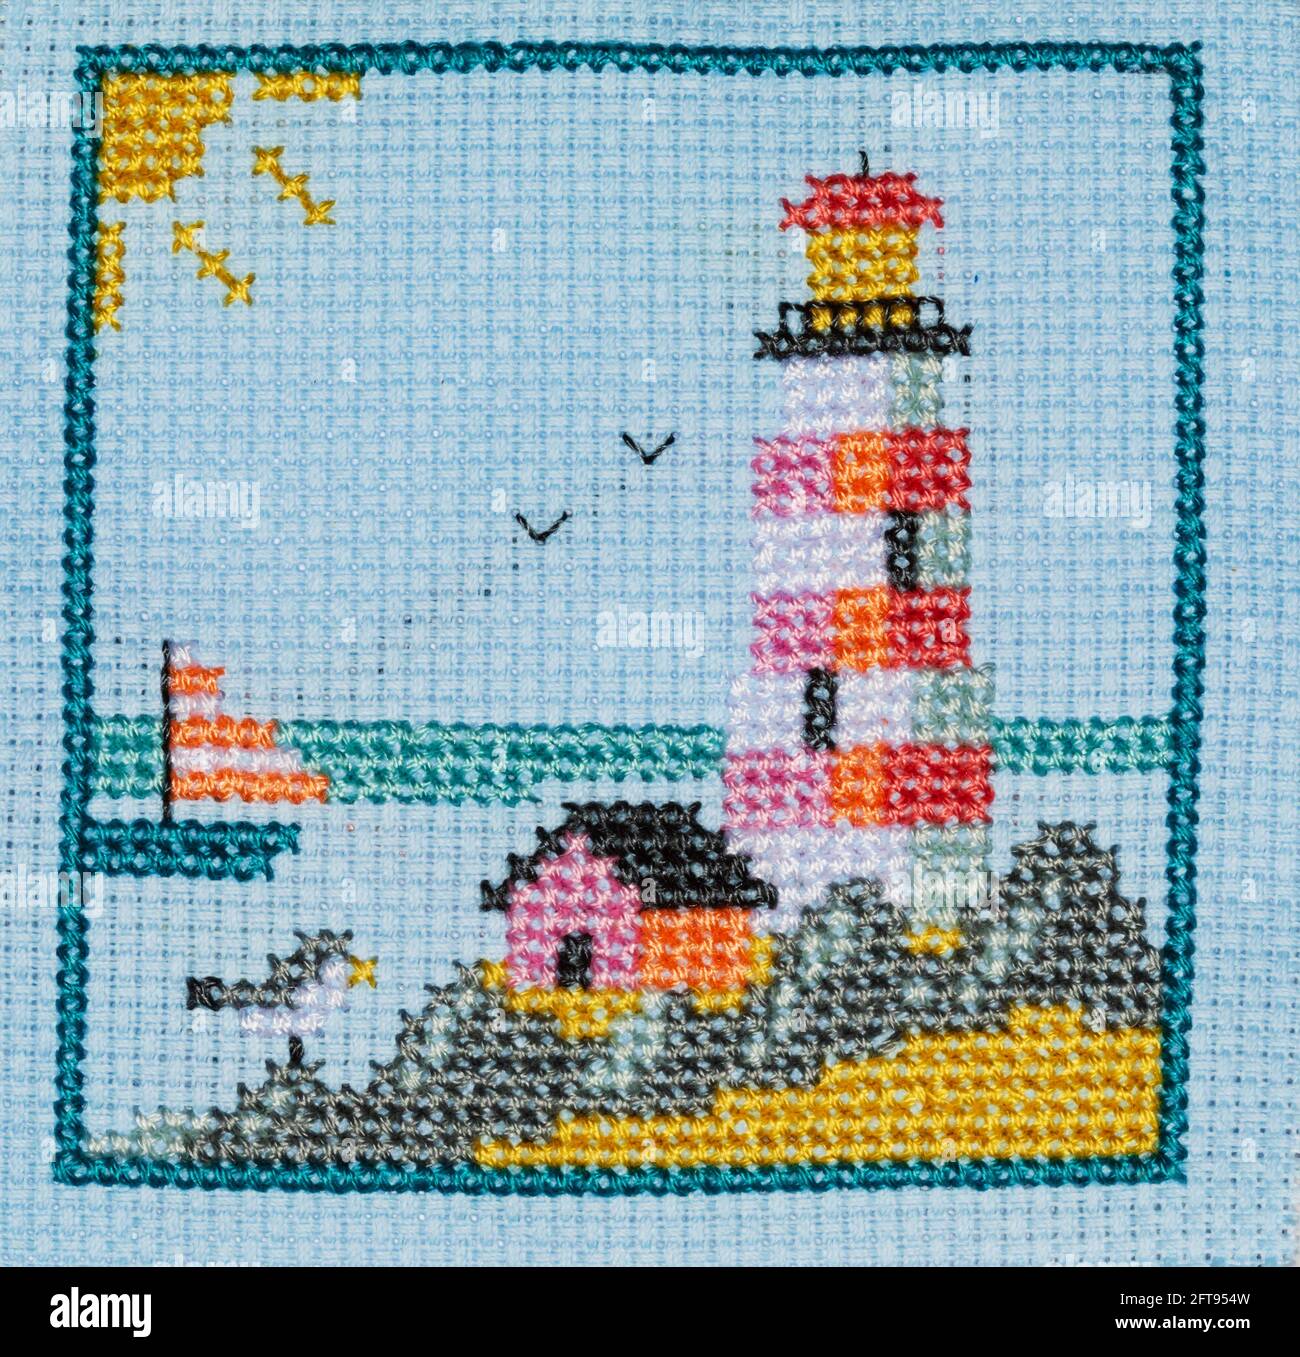 Embroidered needlework picture of the seaside with a lighthouse and yacht. Stock Photo